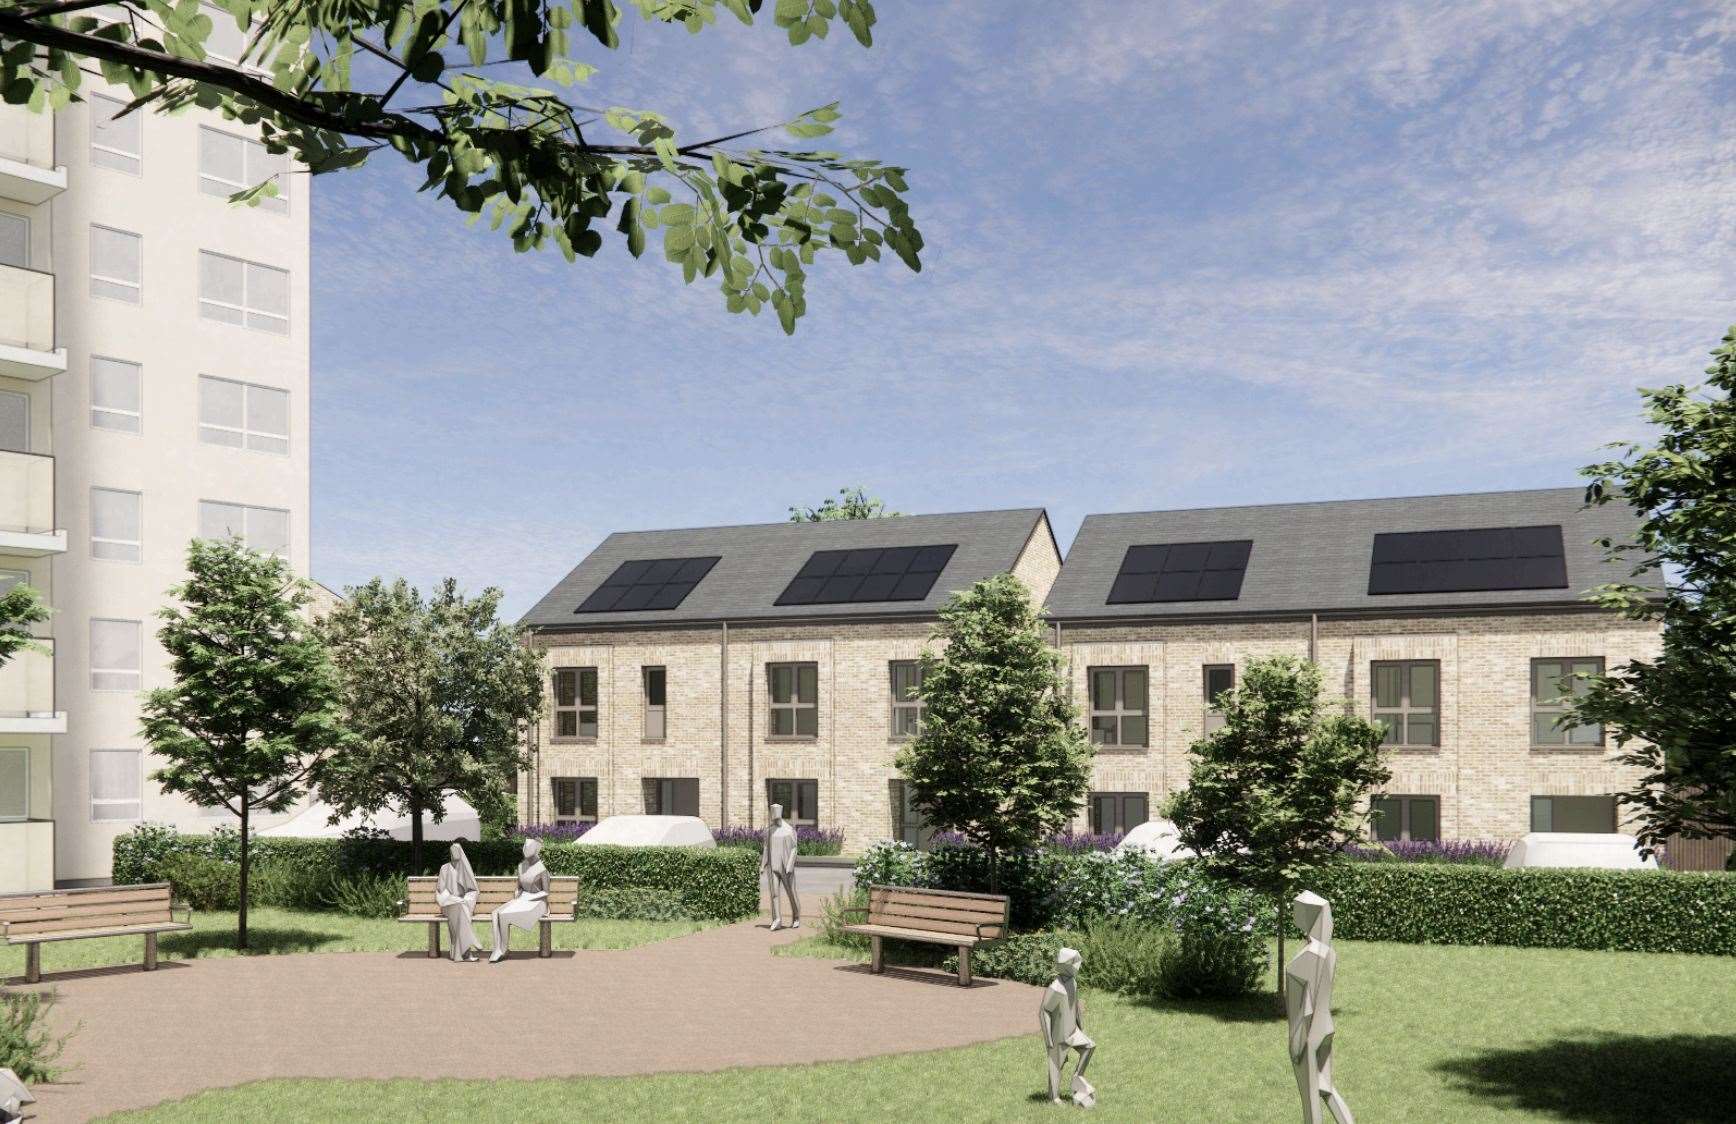 An existing community garden at Stanar Court, Ramsgate will be revived. Picture: HMY Architects/ Thanet District Council